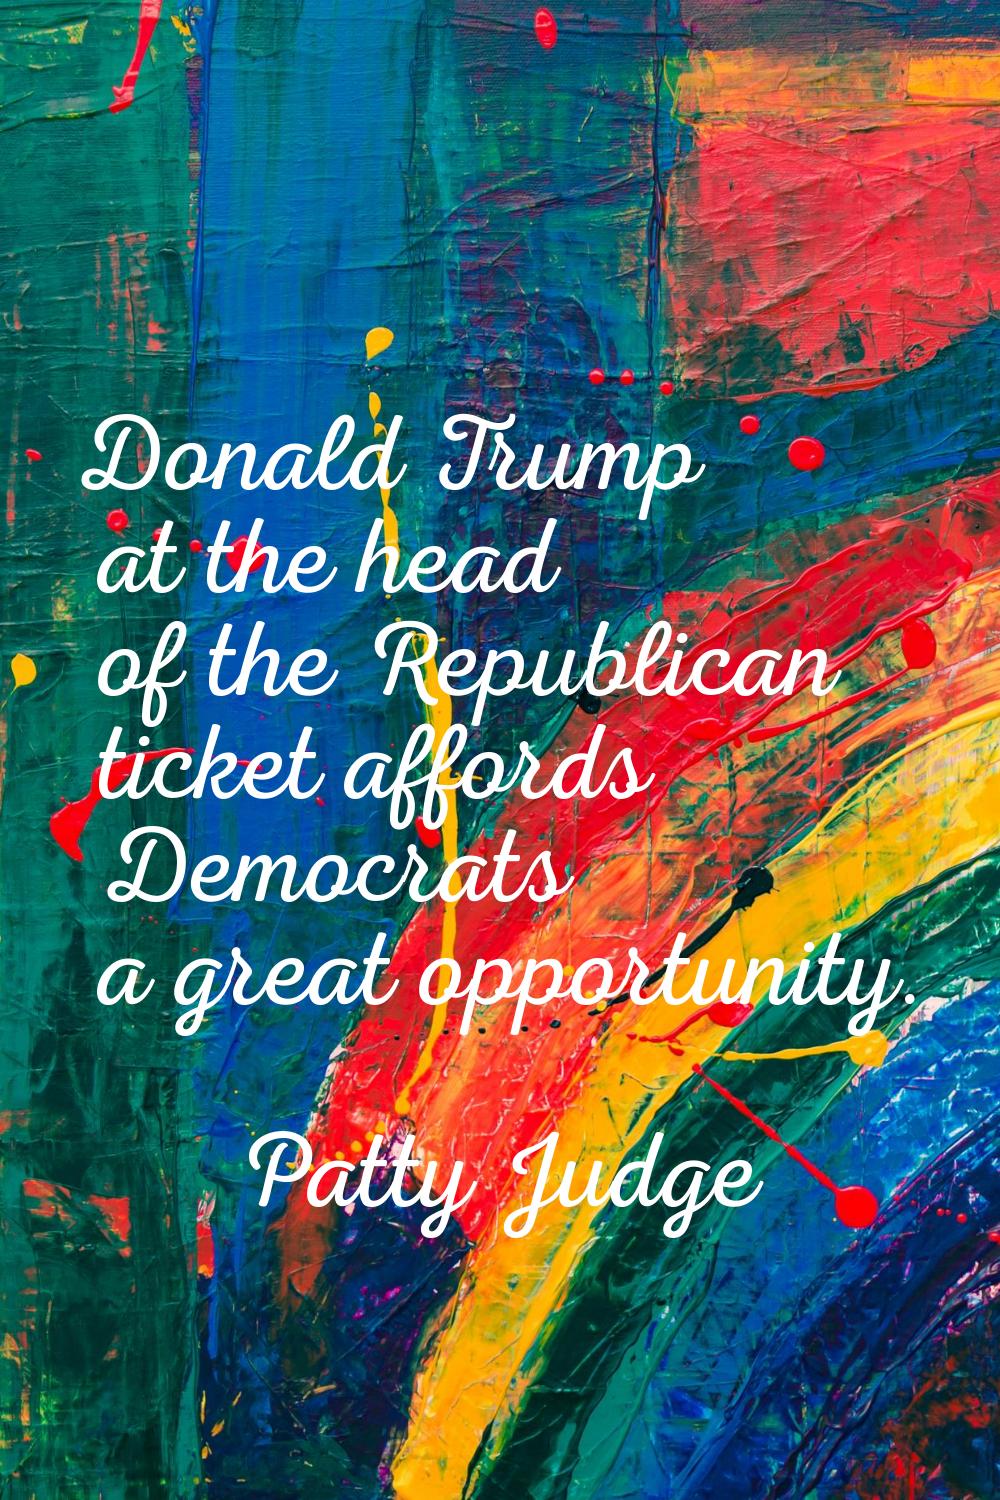 Donald Trump at the head of the Republican ticket affords Democrats a great opportunity.